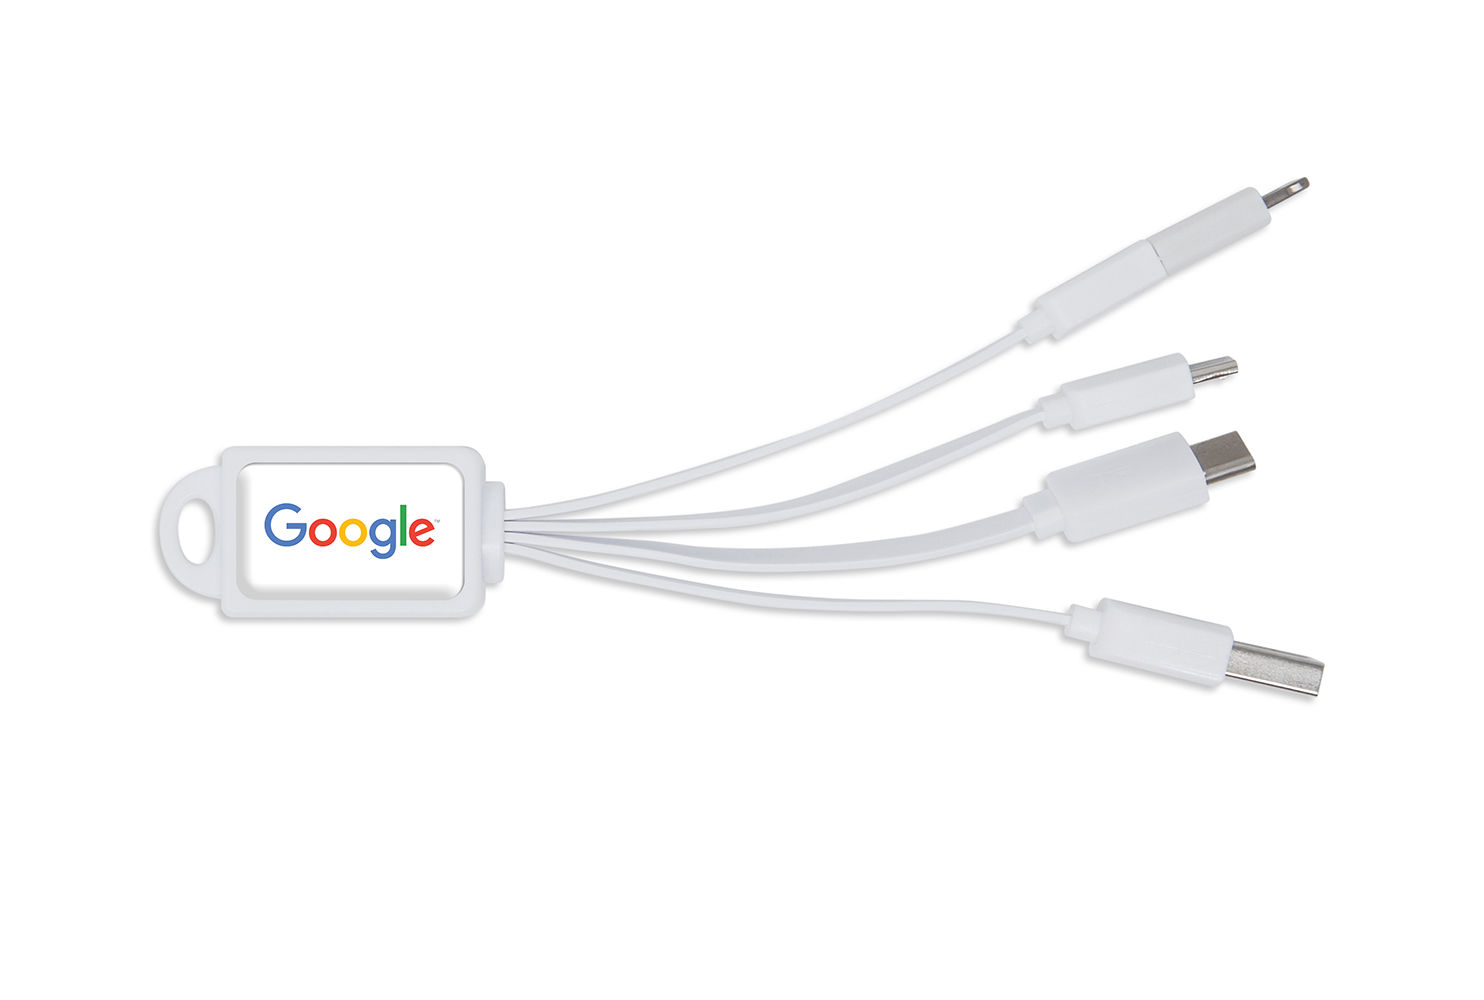 Branded Calimari-C Connector Cord White